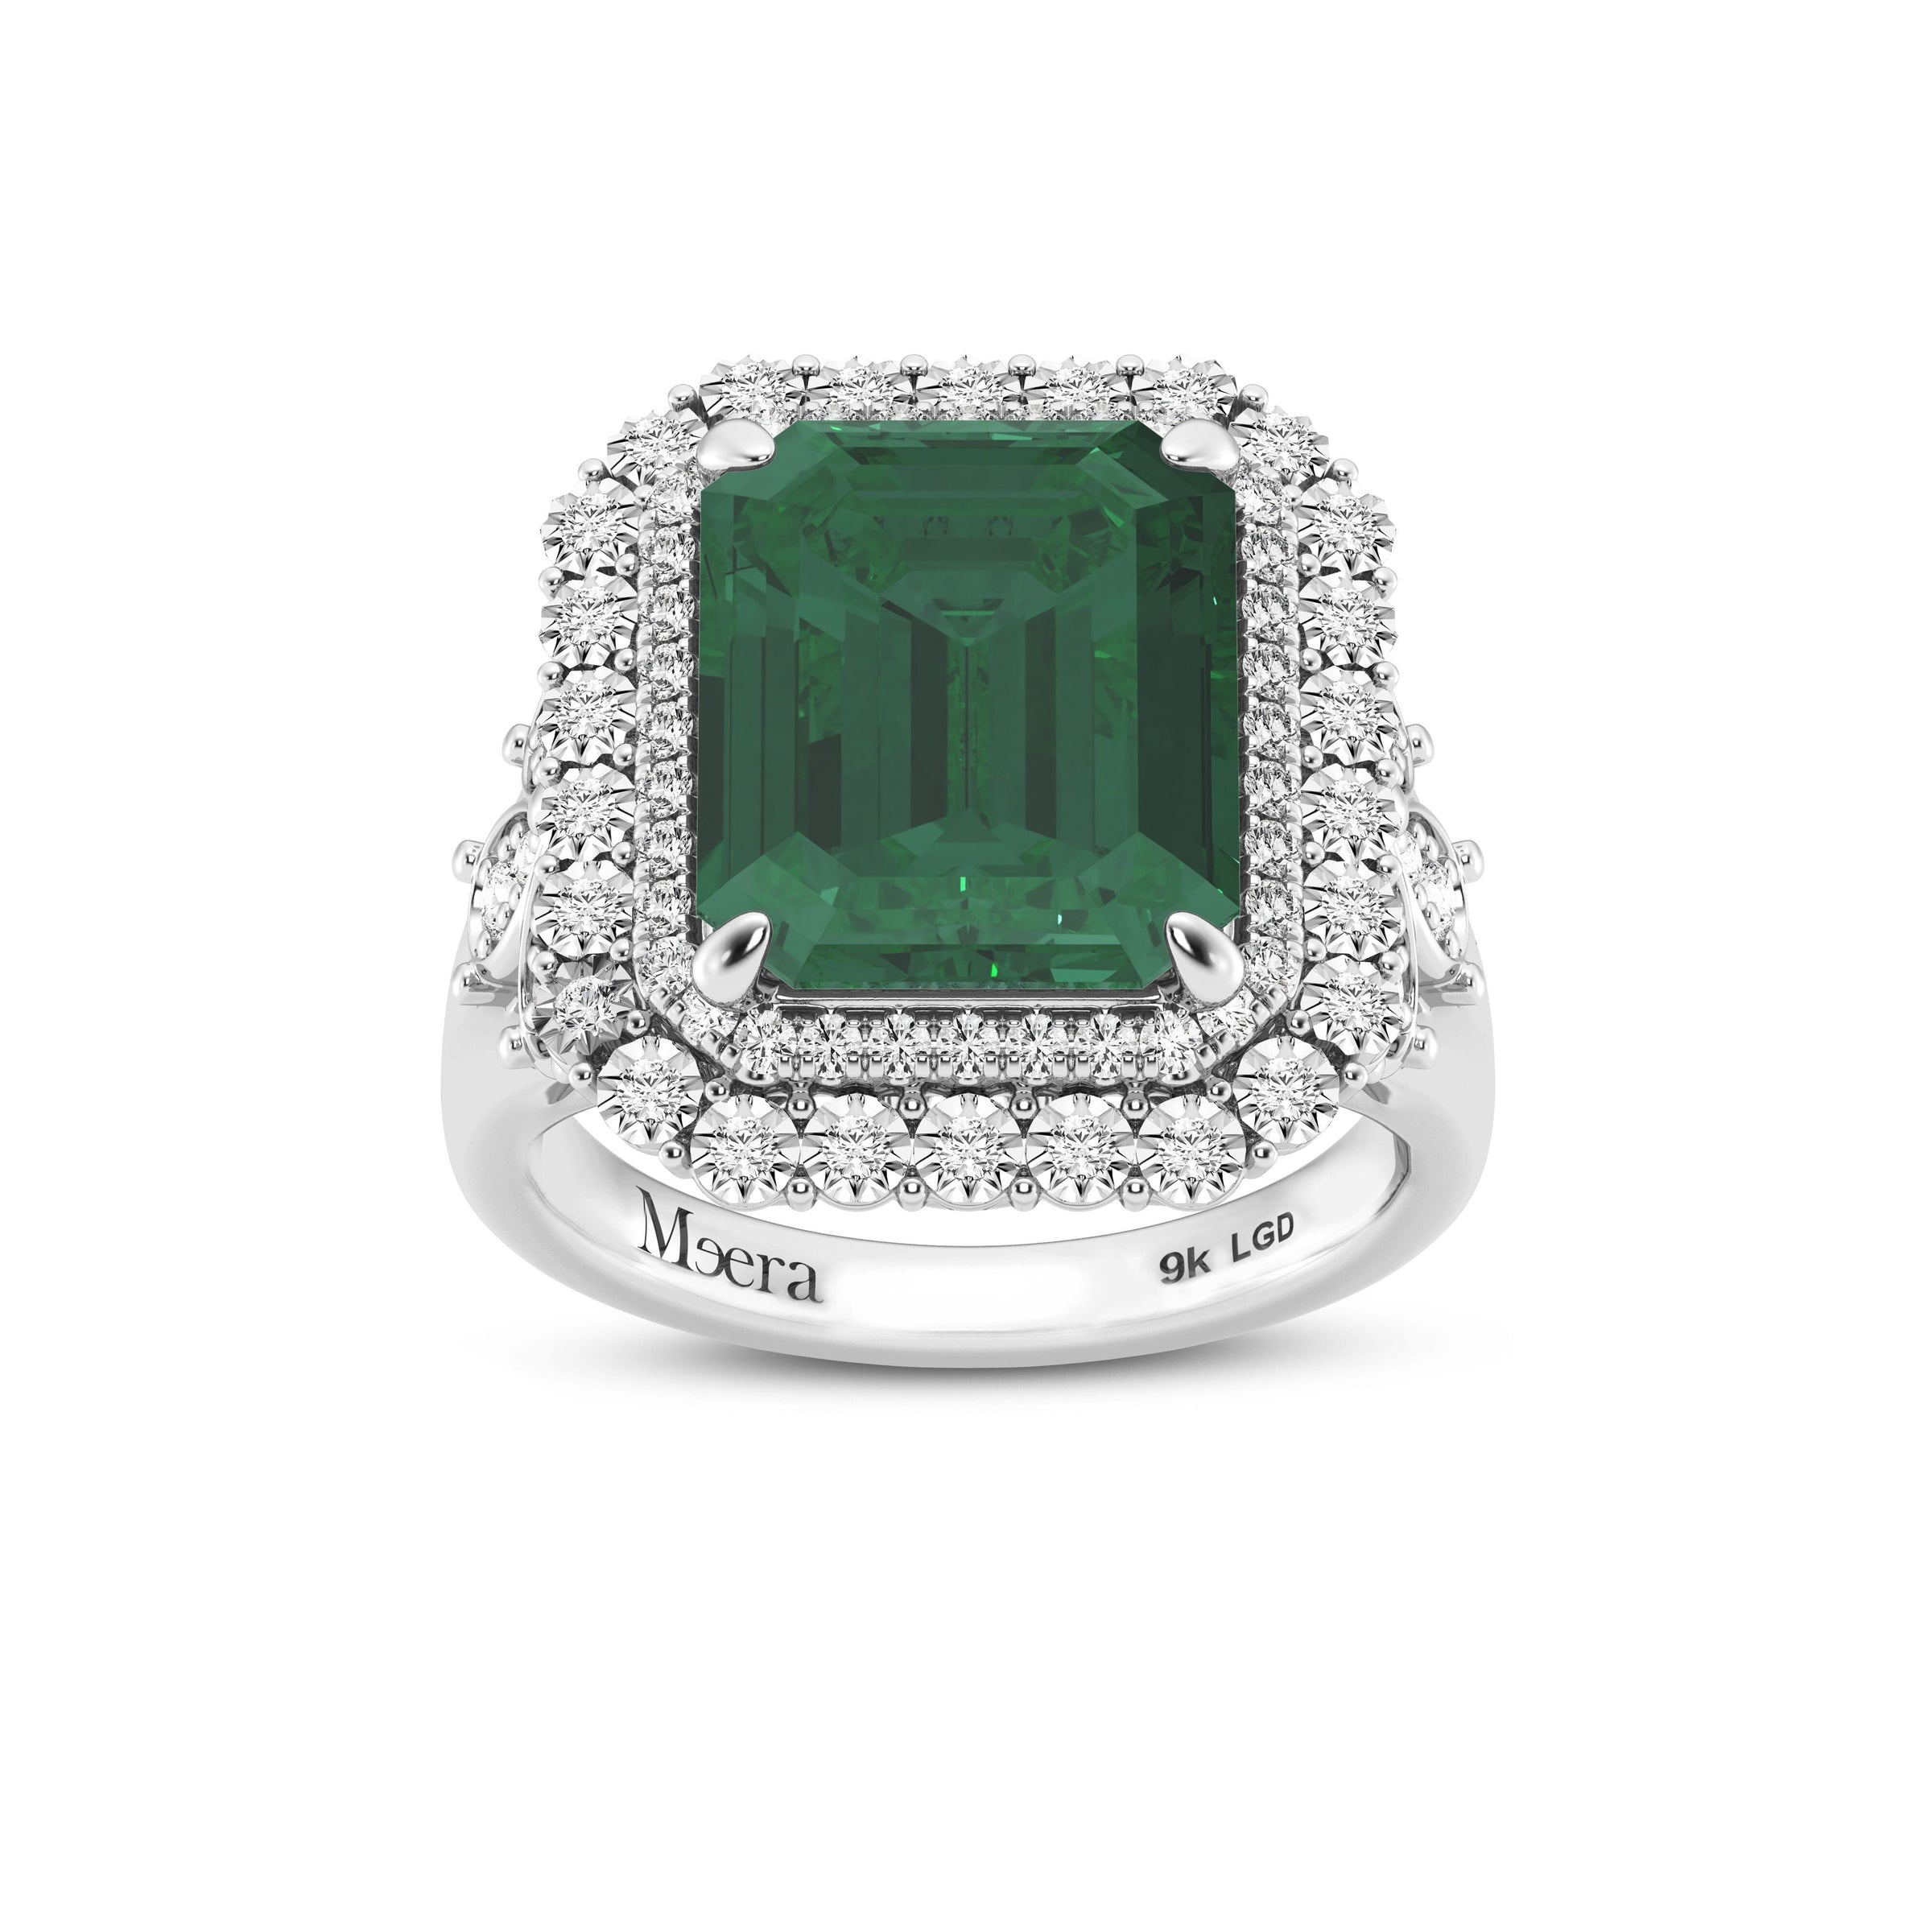 Meera Laboratory Grown Columbian Emerald Ring with 1/2ct of Laboratory Grown Diamonds in 9ct White Gold Rings Bevilles 